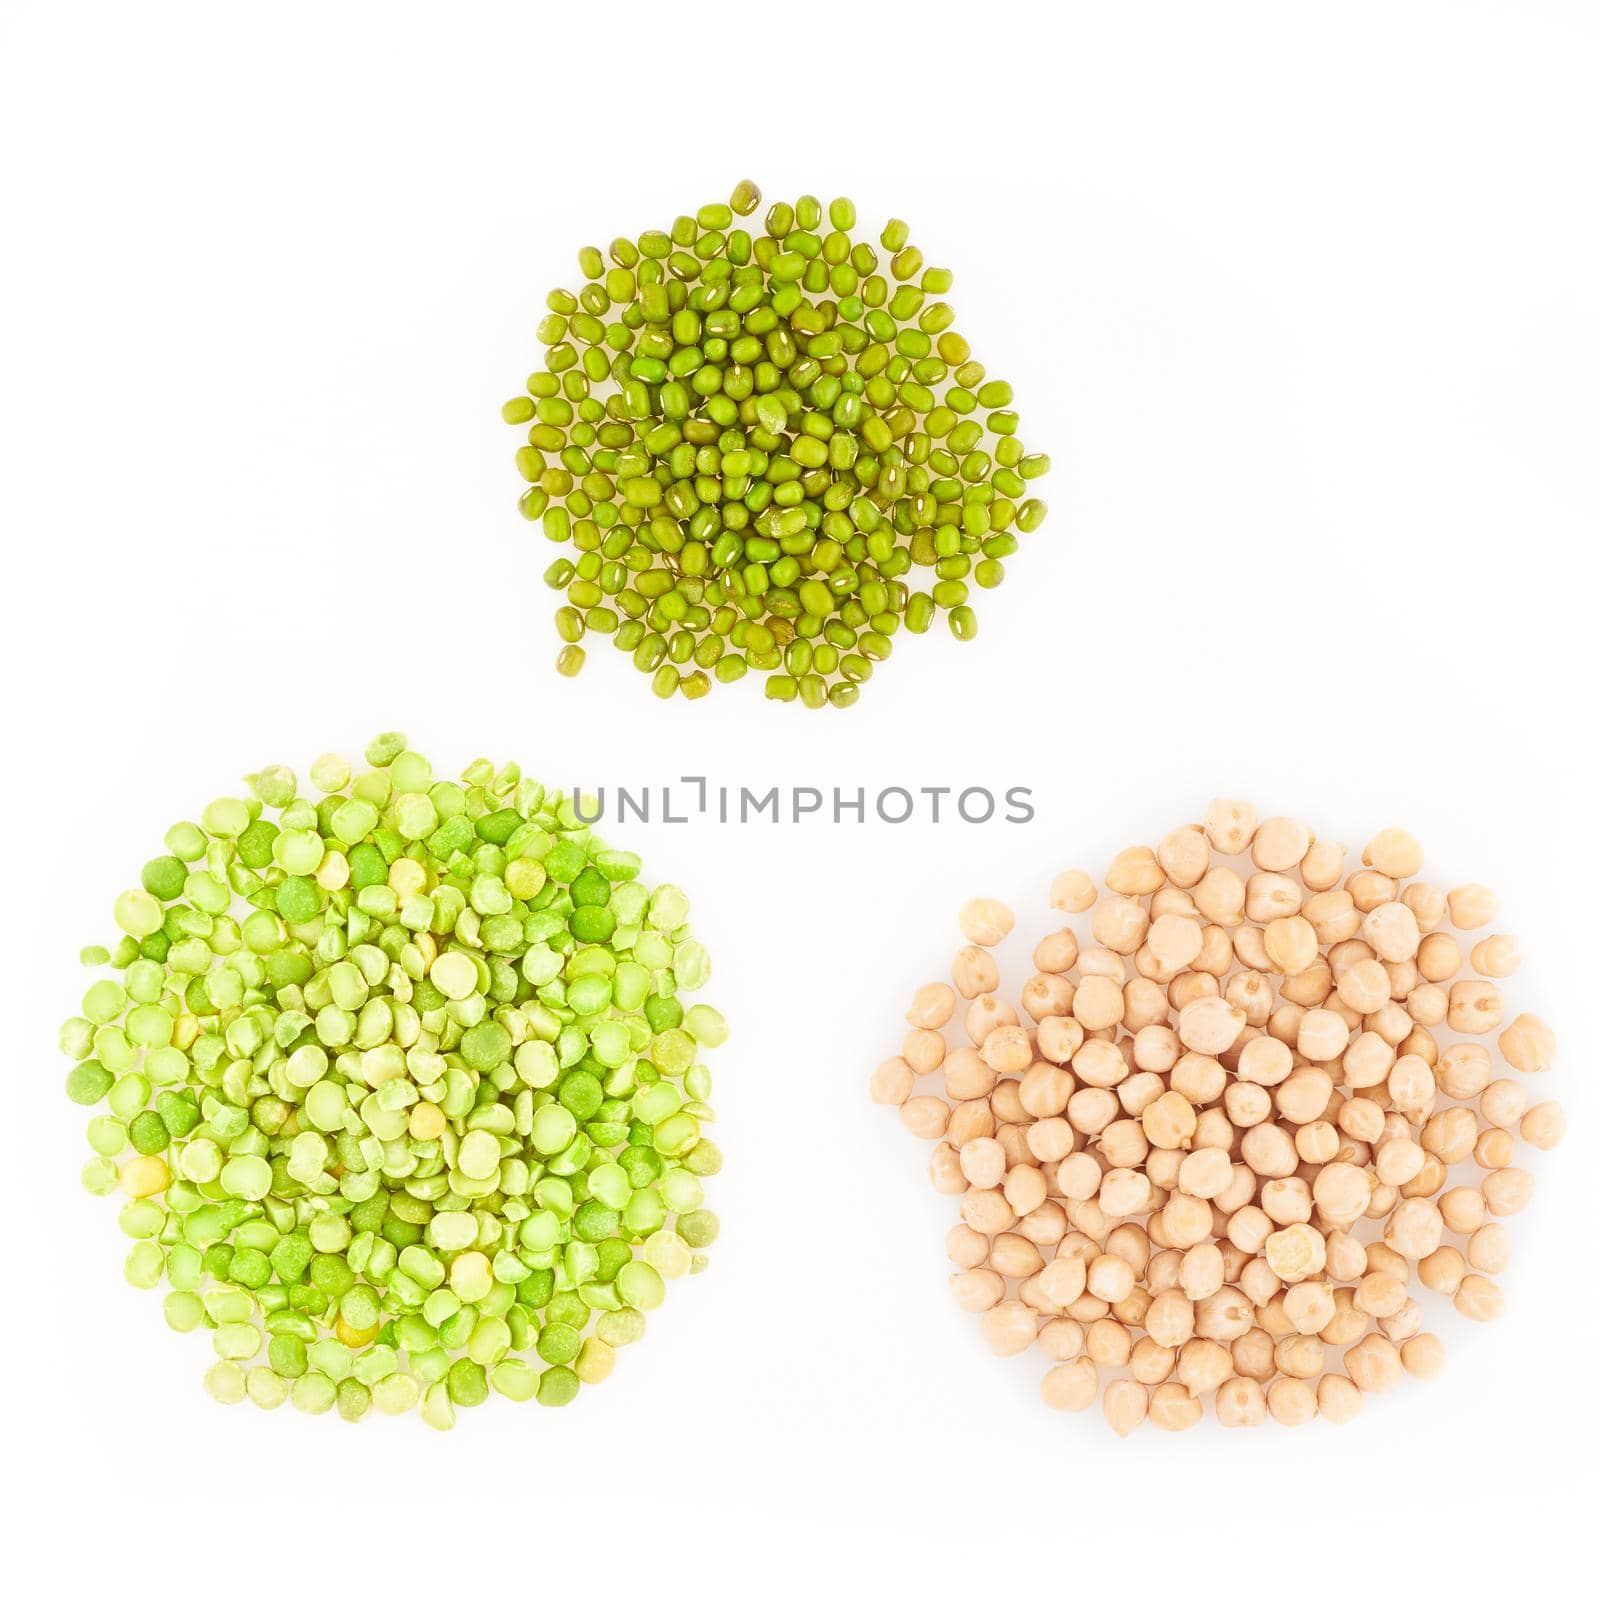 three kinds of raw dried legumes - chickpeas, mung bean, green peas, isolated on a white background, triangle